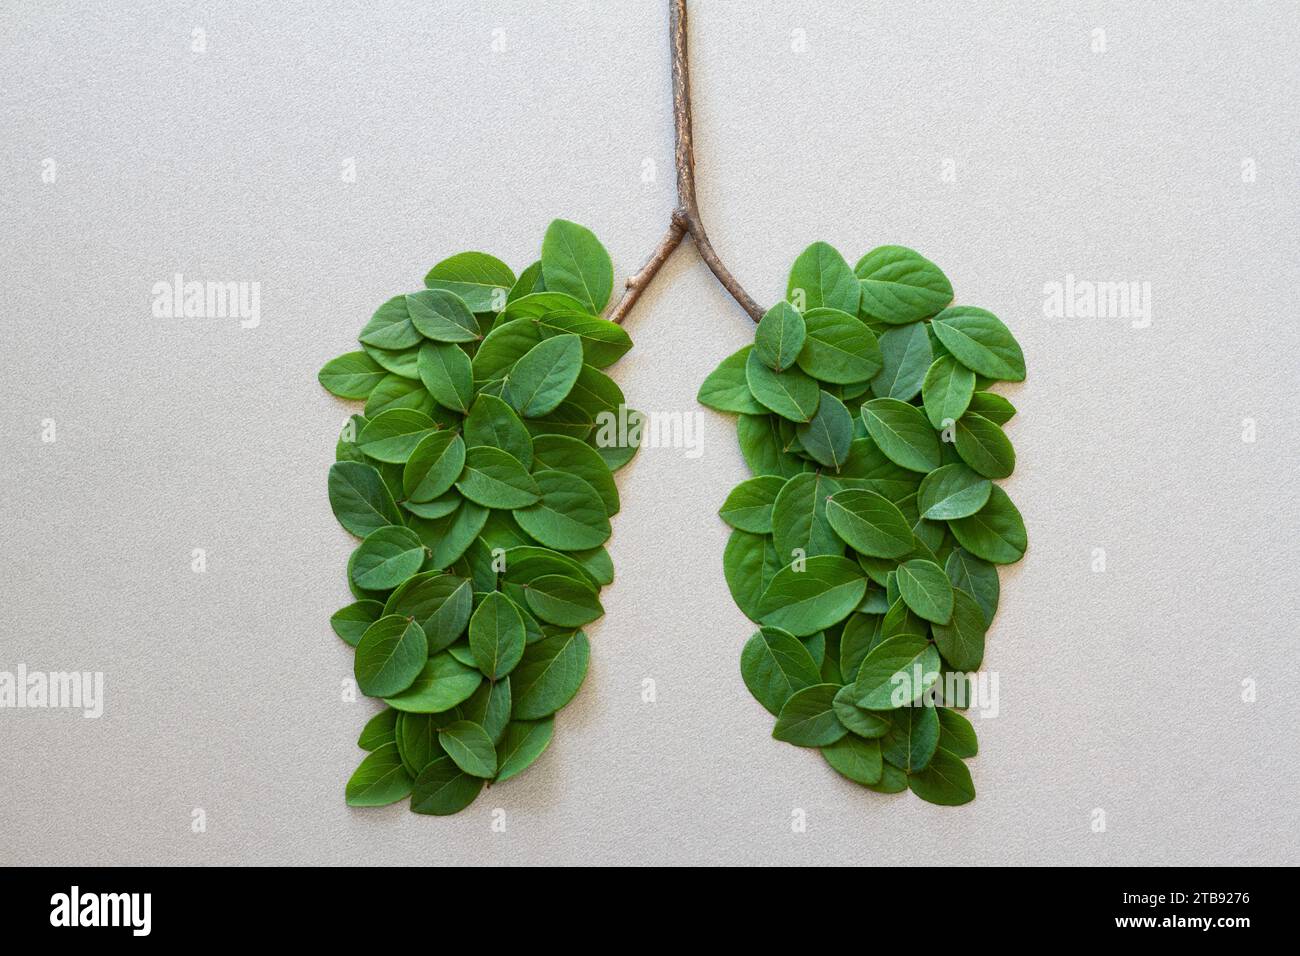 Human lungs symbol made with green leaves, clean air and health concept Stock Photo